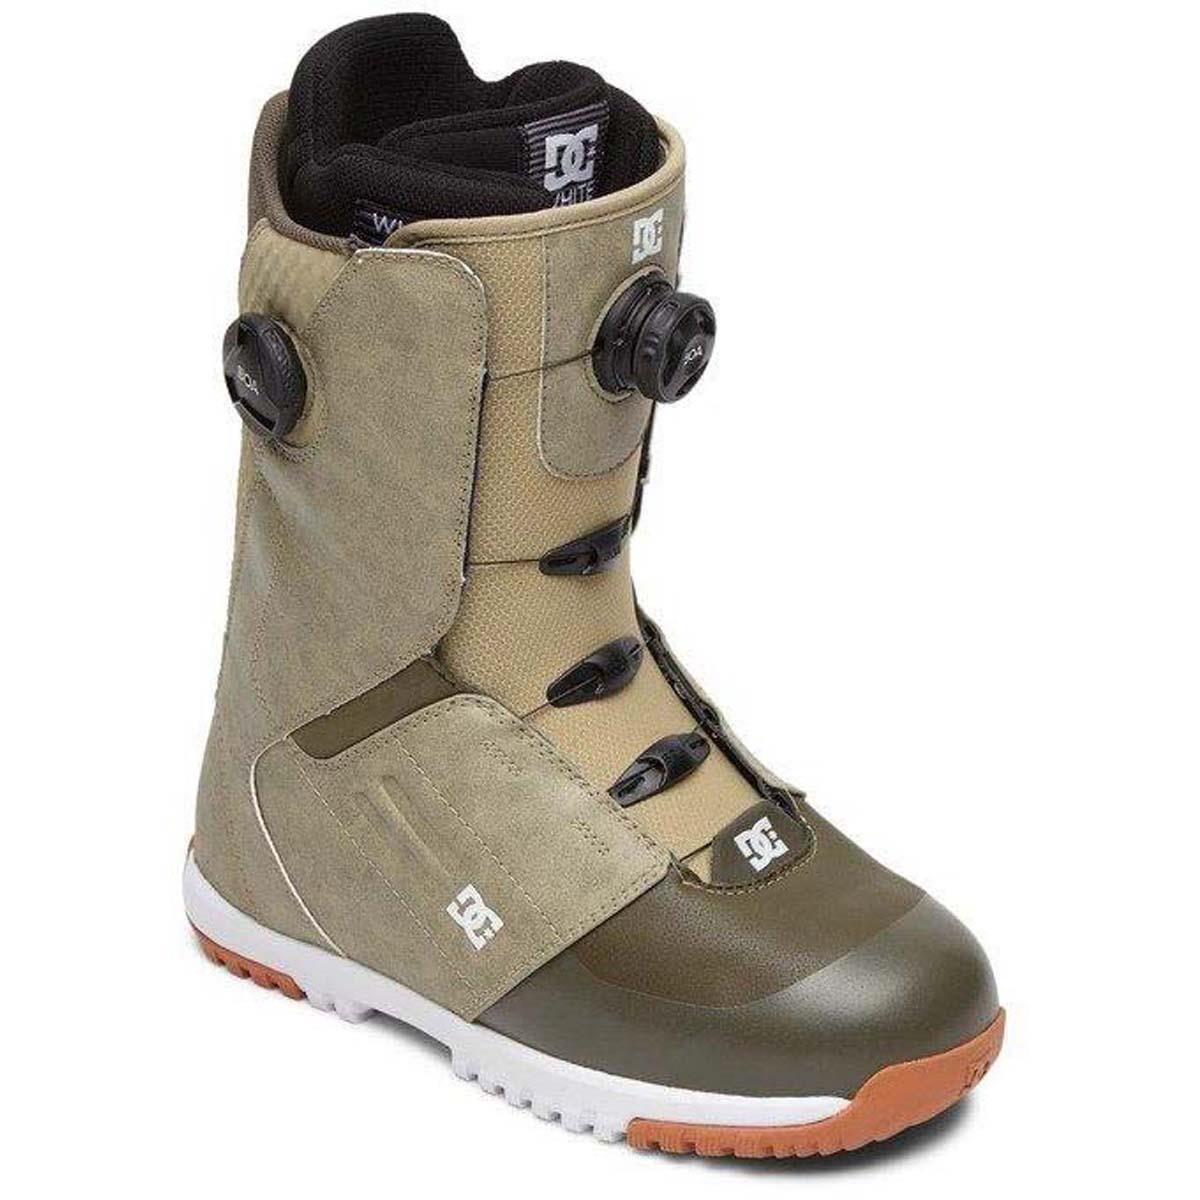 Buy > tan snowboard boots > in stock